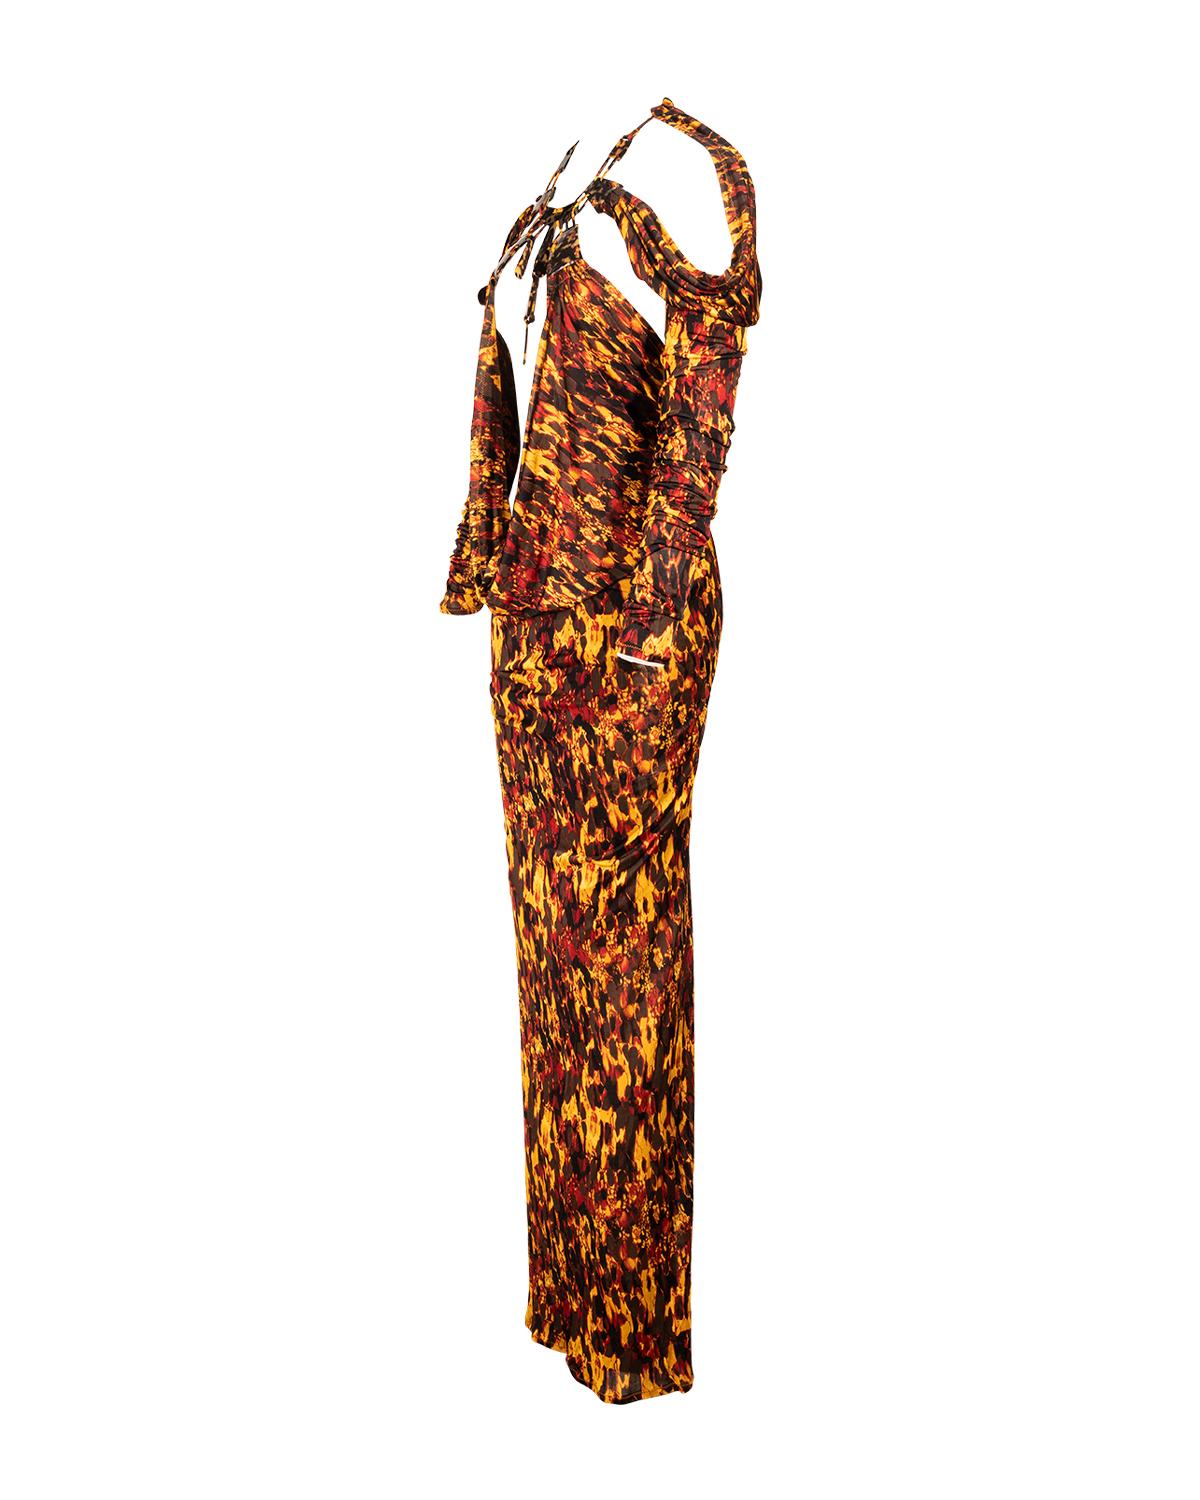 S/S 2005 Jean Paul Gaultier Tortoiseshell Print Dress In Excellent Condition In North Hollywood, CA